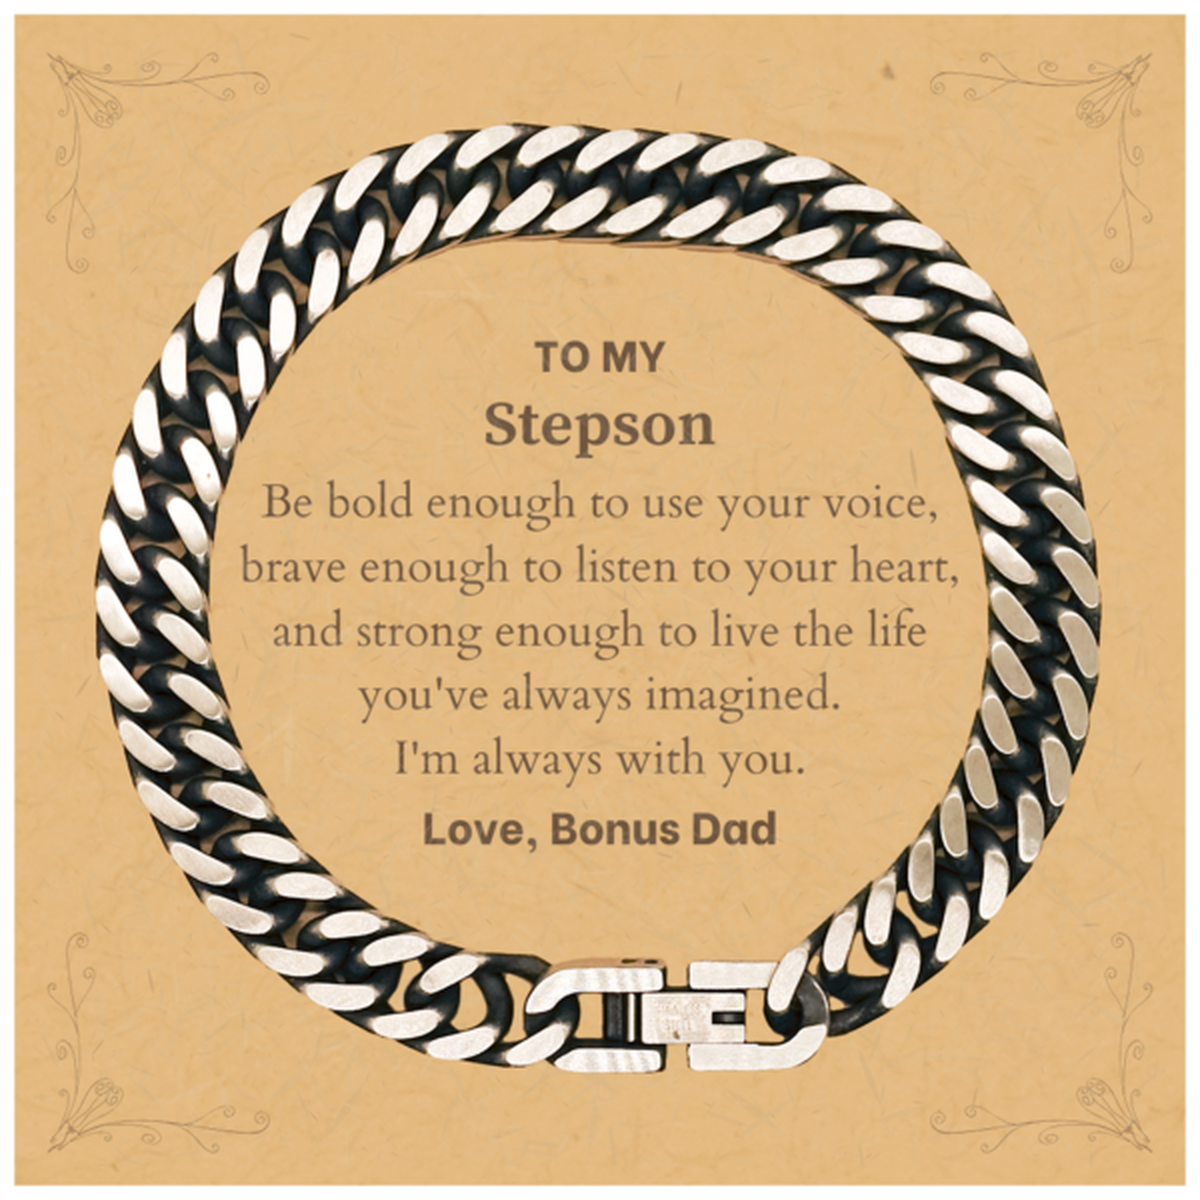 Keepsake Stepson Cuban Link Chain Bracelet Gift Idea Graduation Christmas Birthday Stepson from Bonus Dad, Stepson Be bold enough to use your voice, brave enough to listen to your heart. Love, Bonus Dad